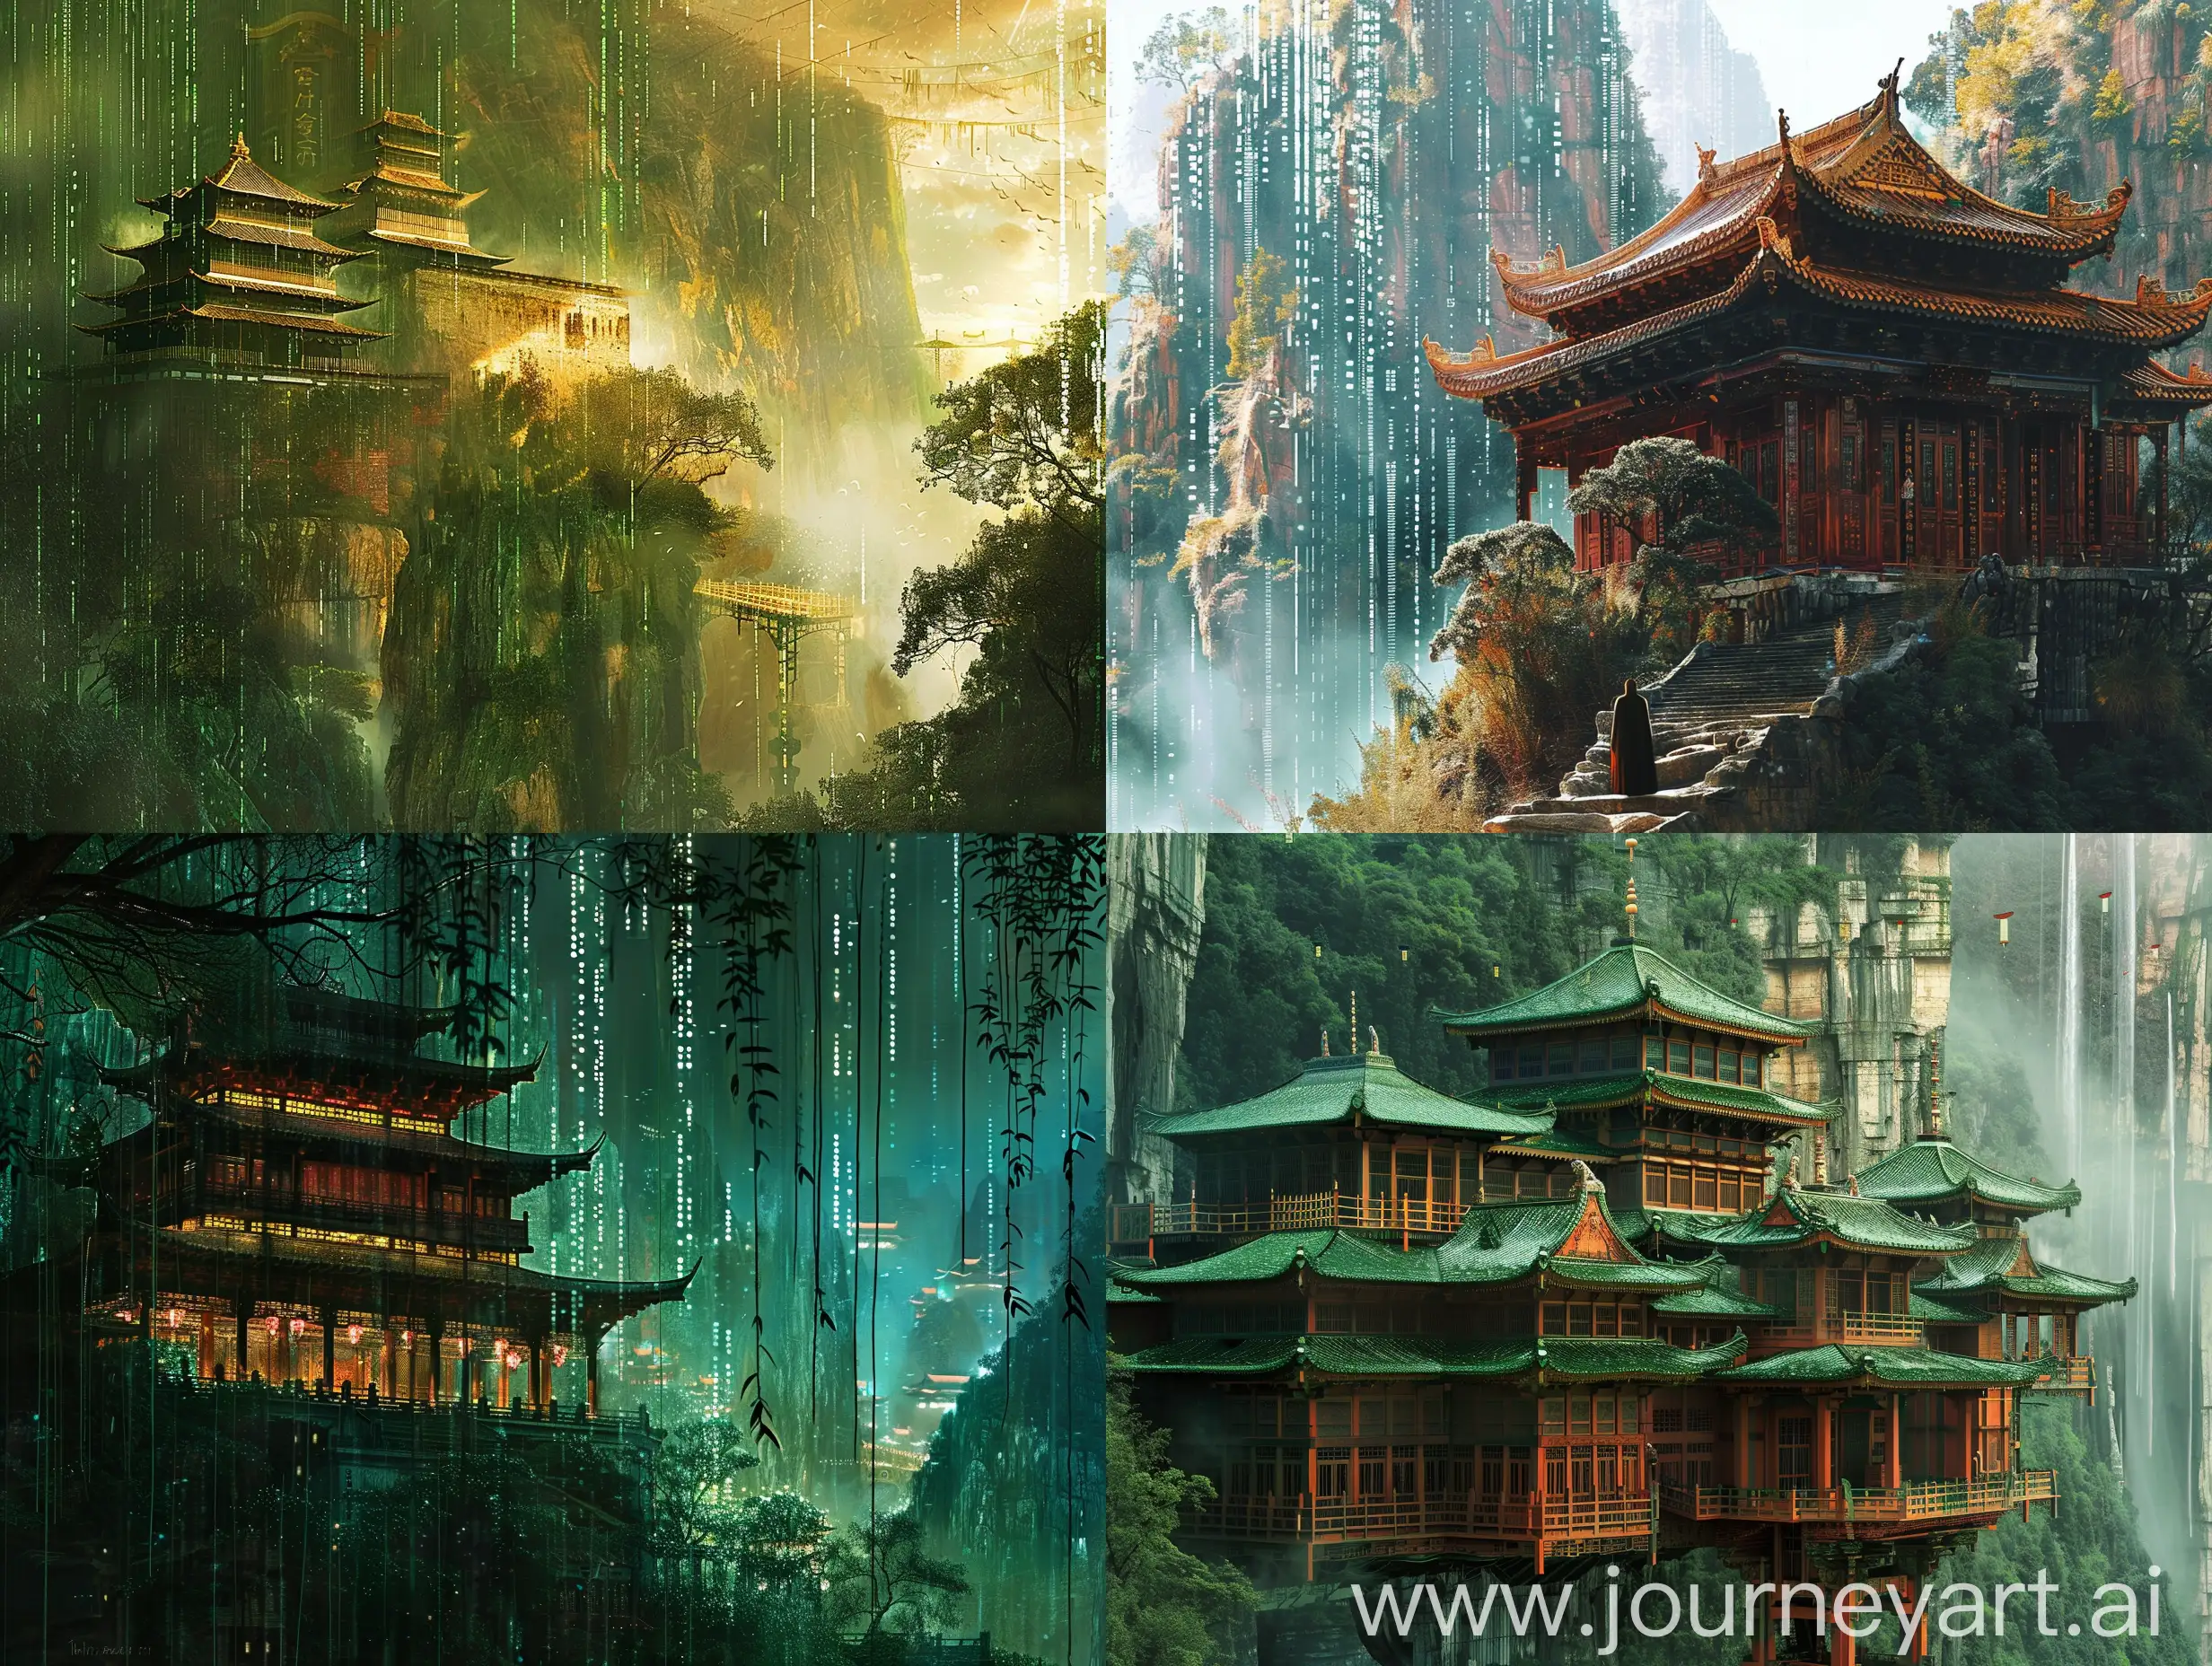 Shangri-La as a realistic painting with Matrix-like background